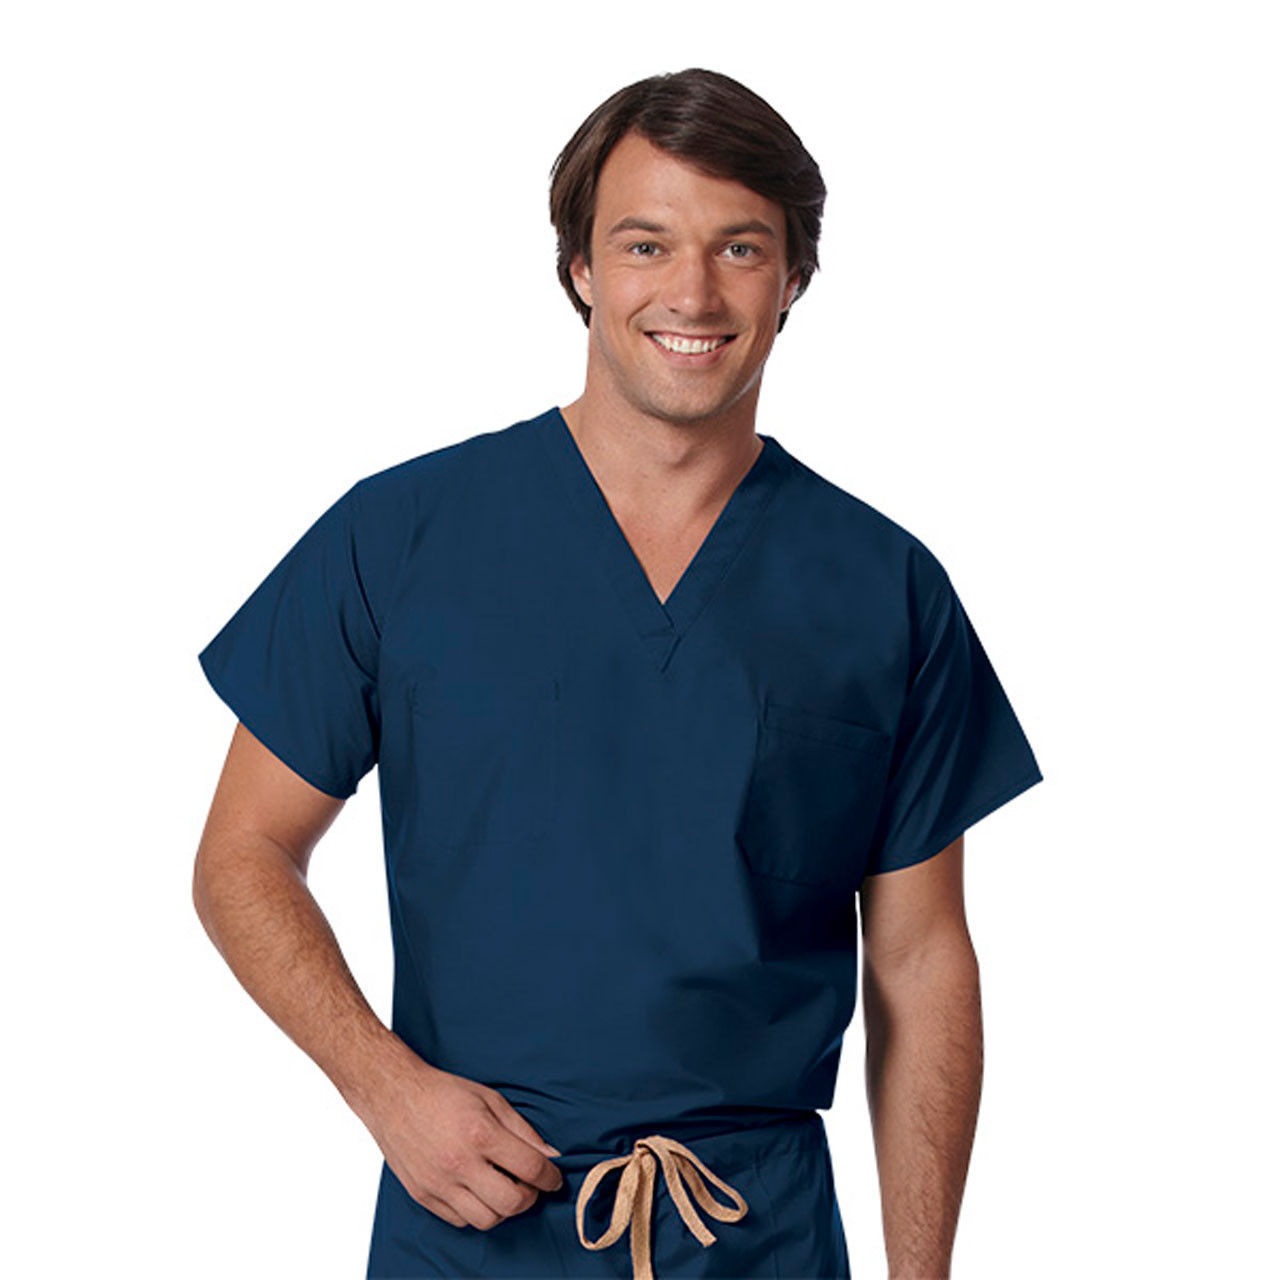 Is the navy surgical scrubs set made from comfortable materials?